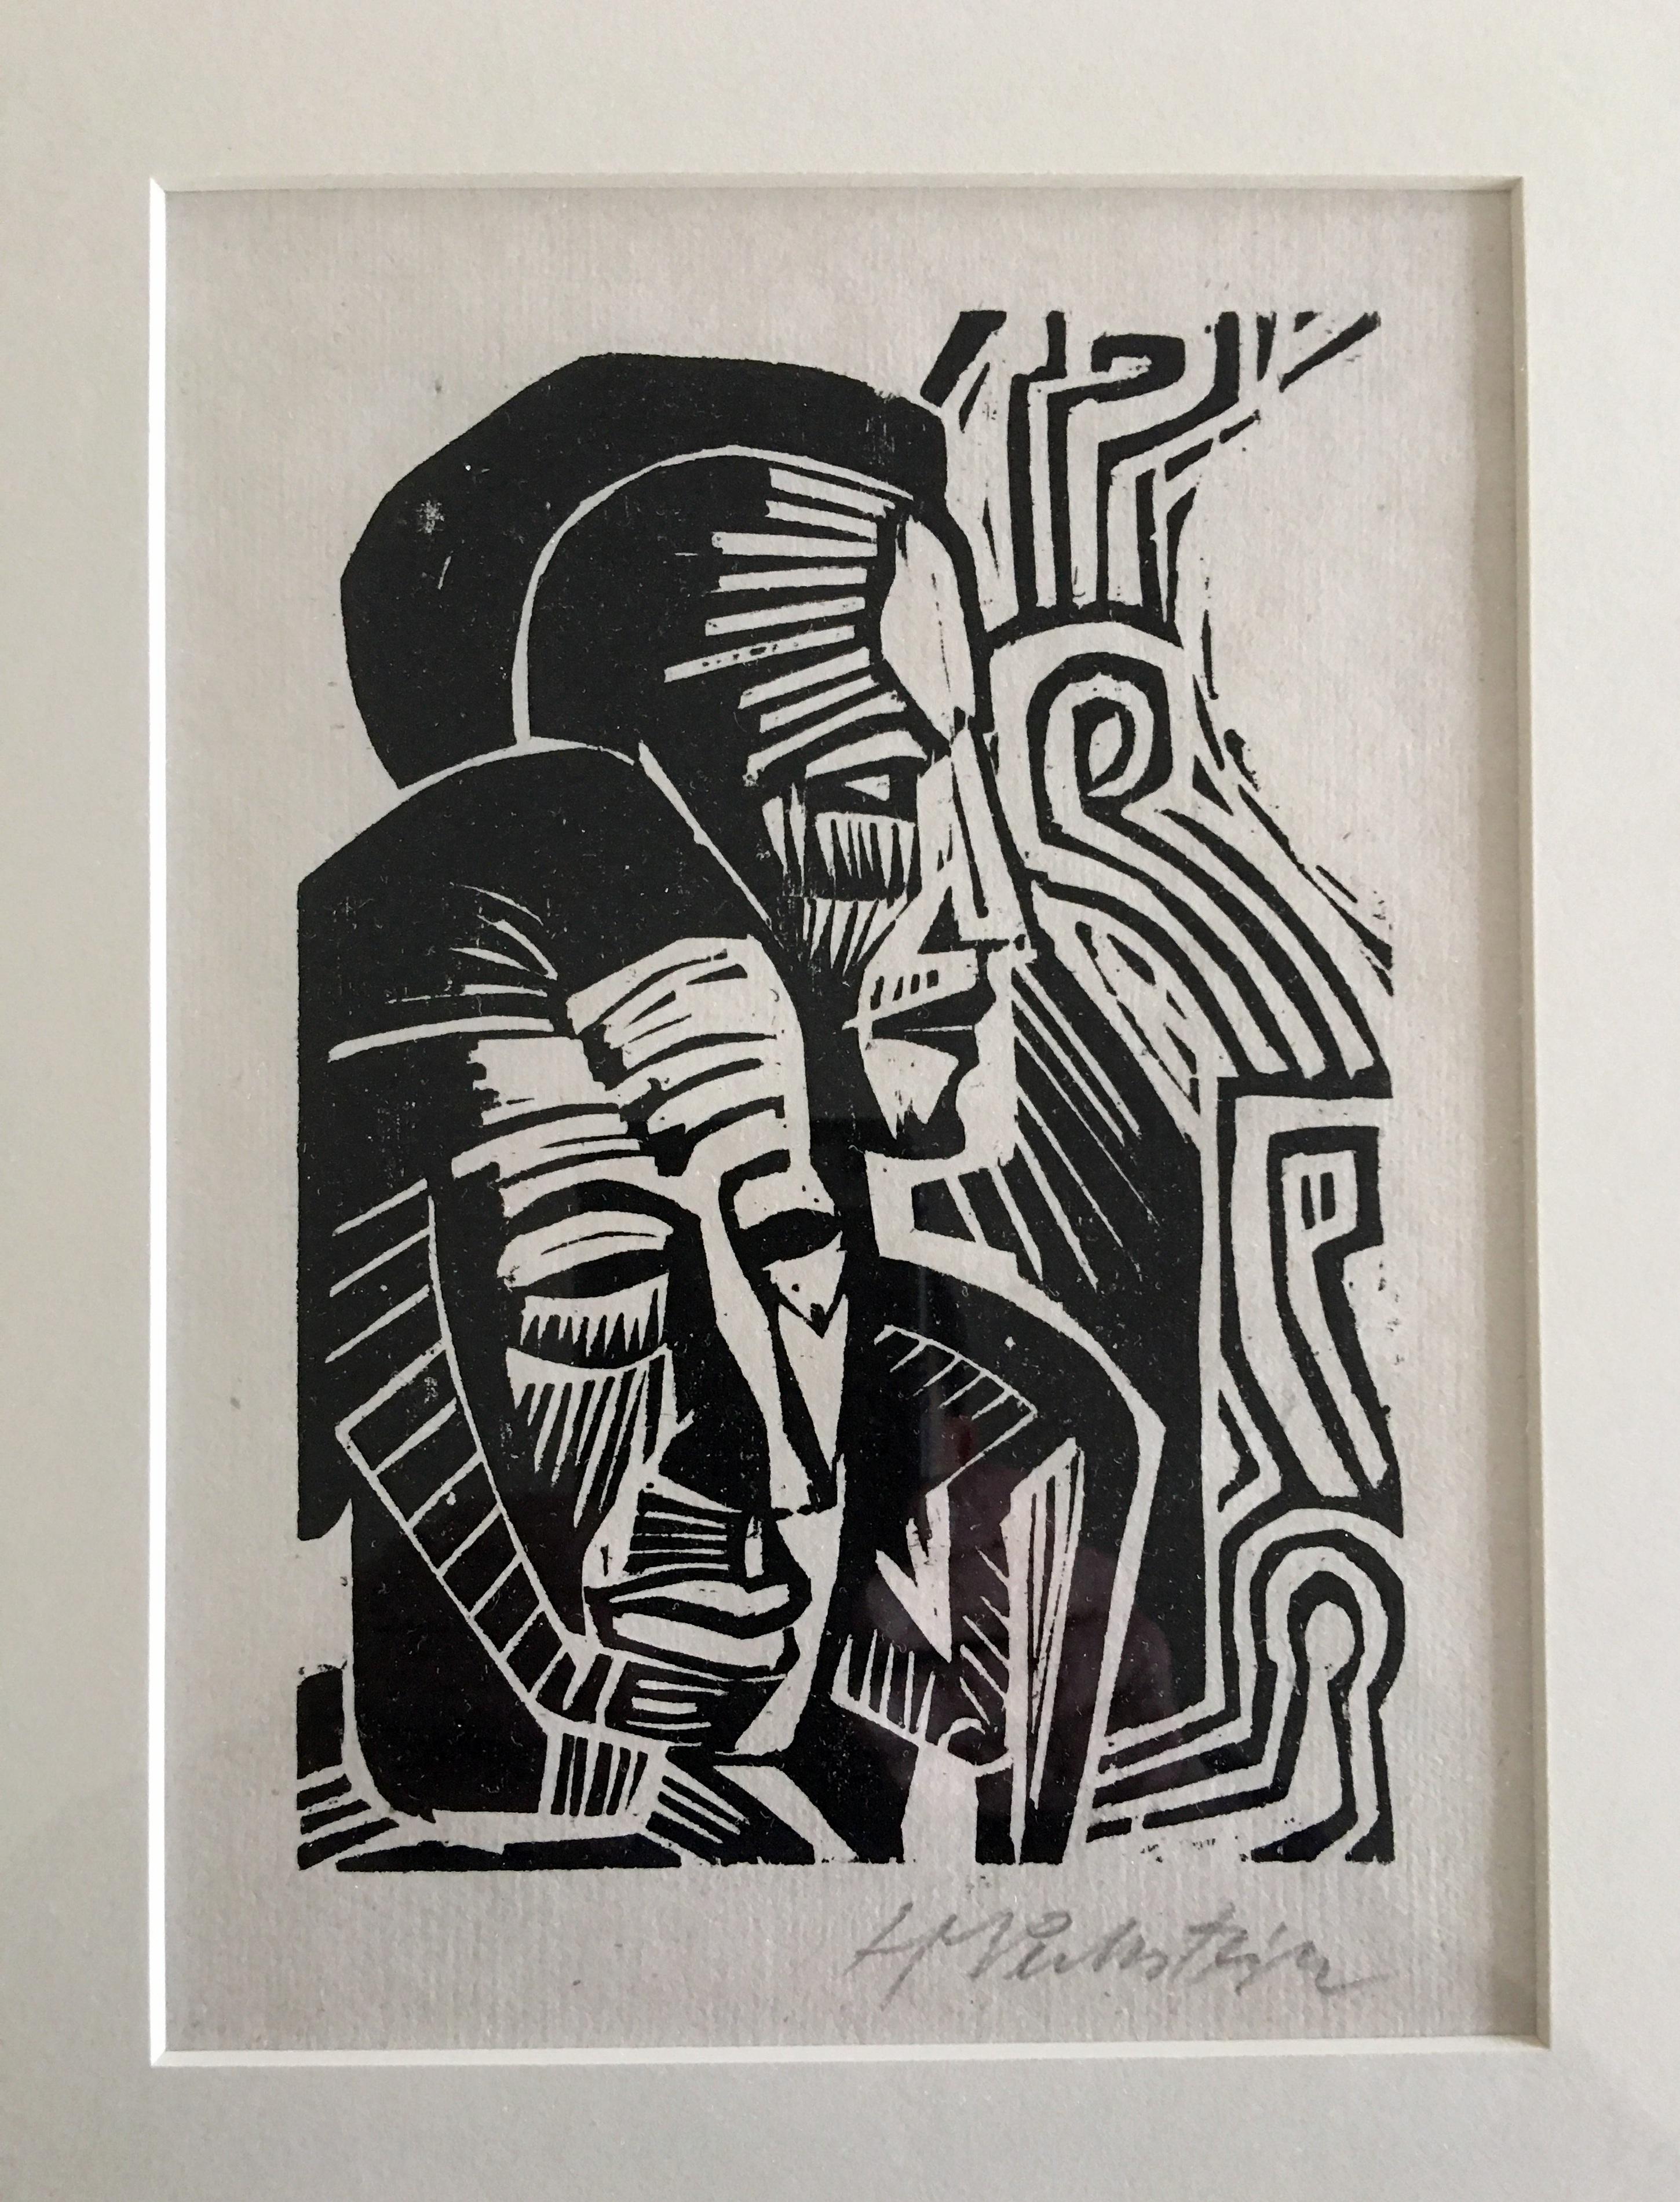 Two Heads - Print by Max Pechstein